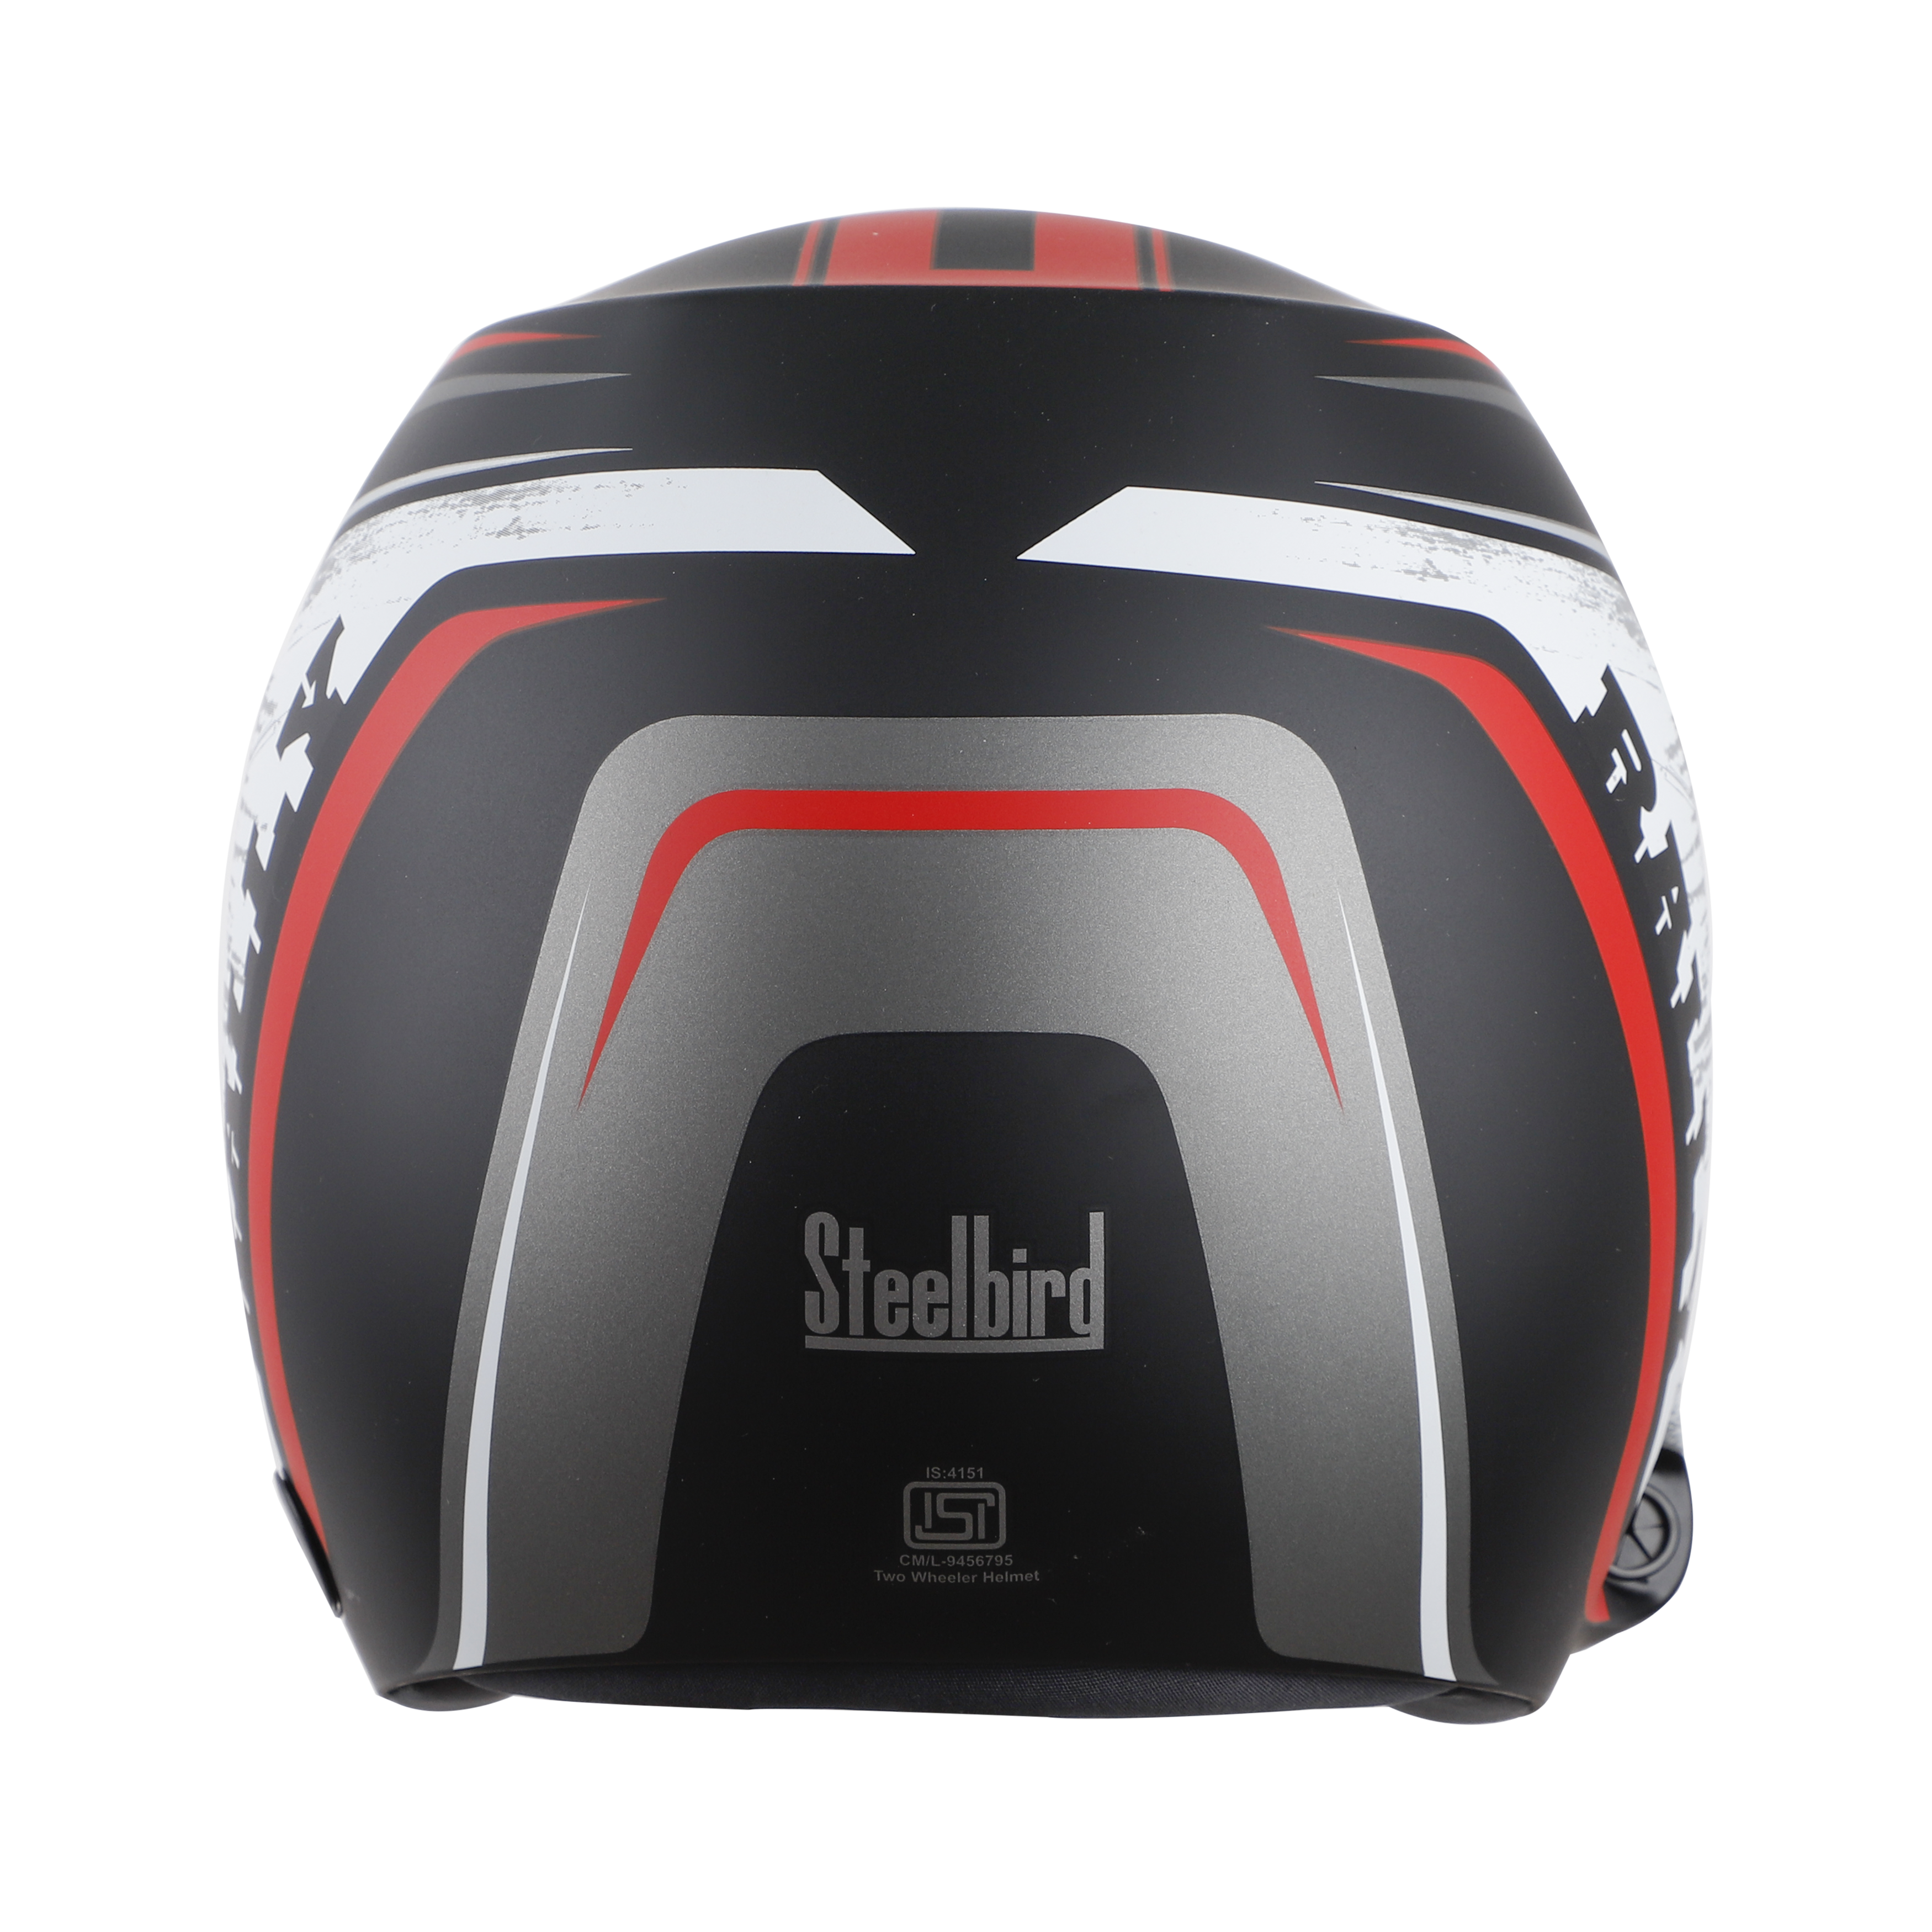 SB-51 RALLY RUT GLOSSY BLACK WITH RED ( FITTED WITH CLEAR VISOR EXTRA SMOKE VISOR FREE)